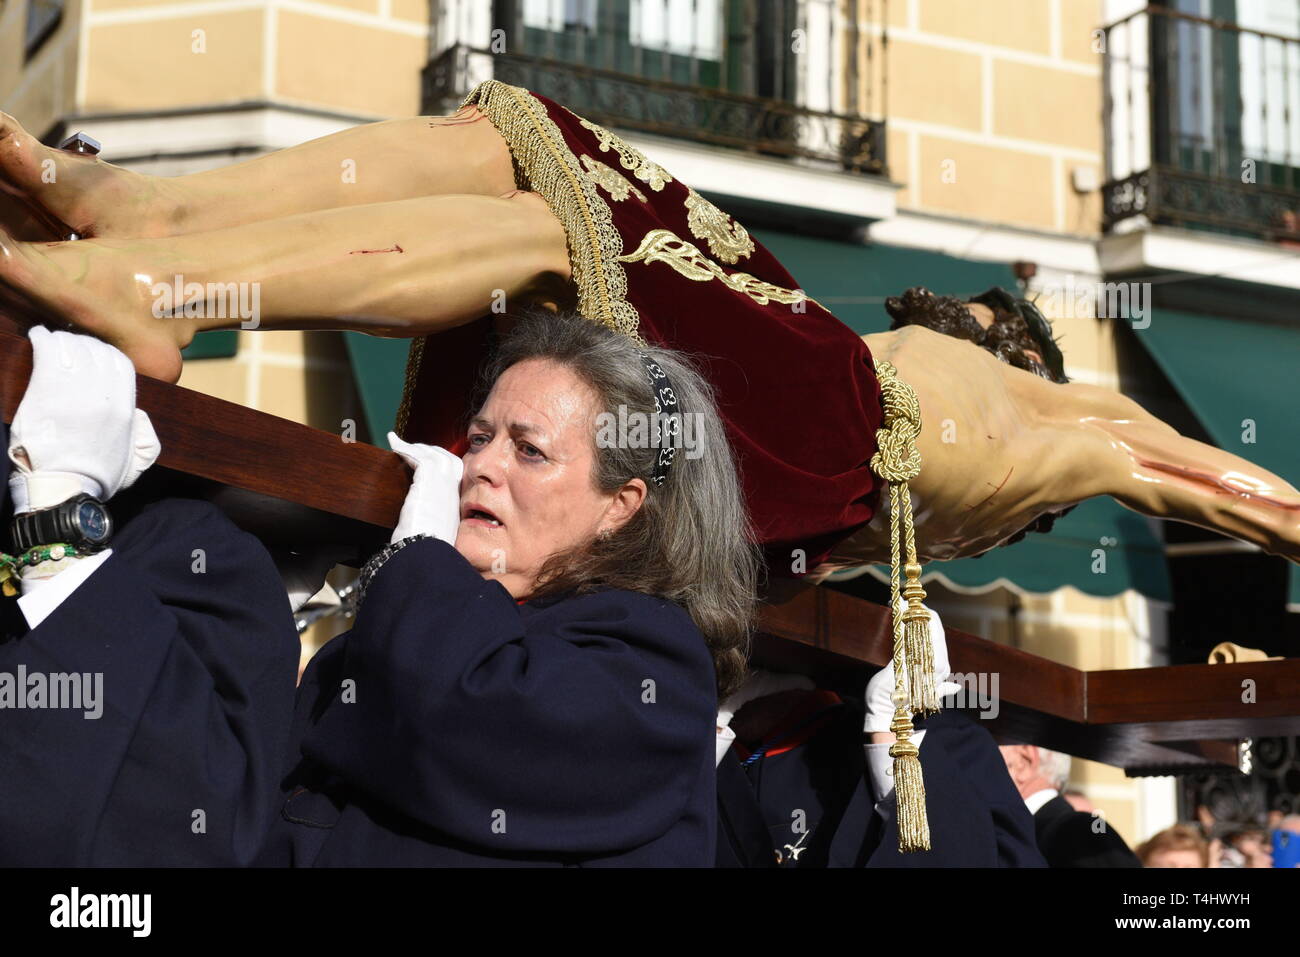 Madrid, Madrid, Spain. 16th Apr, 2019. Penitents from 'Cristo de Los Alabarderos' brotherhood are seen carrying a statue of Jesus Christ during the 'Cristo de Los Alabarderos' procession in Madrid.Cristo de Los Alabarderos procession, also known as the procession of Spanish Royal Guard, took place on the Holy Tuesday and in Good Friday in Madrid. Penitents carried a statue of Jesus Christ from 'De las Fuerzas Armadas' church to 'Real' palace in central Madrid and on Good Friday penitents will march in reverse, this has been celebrated since 1753 and it is one of the most important processio Stock Photo